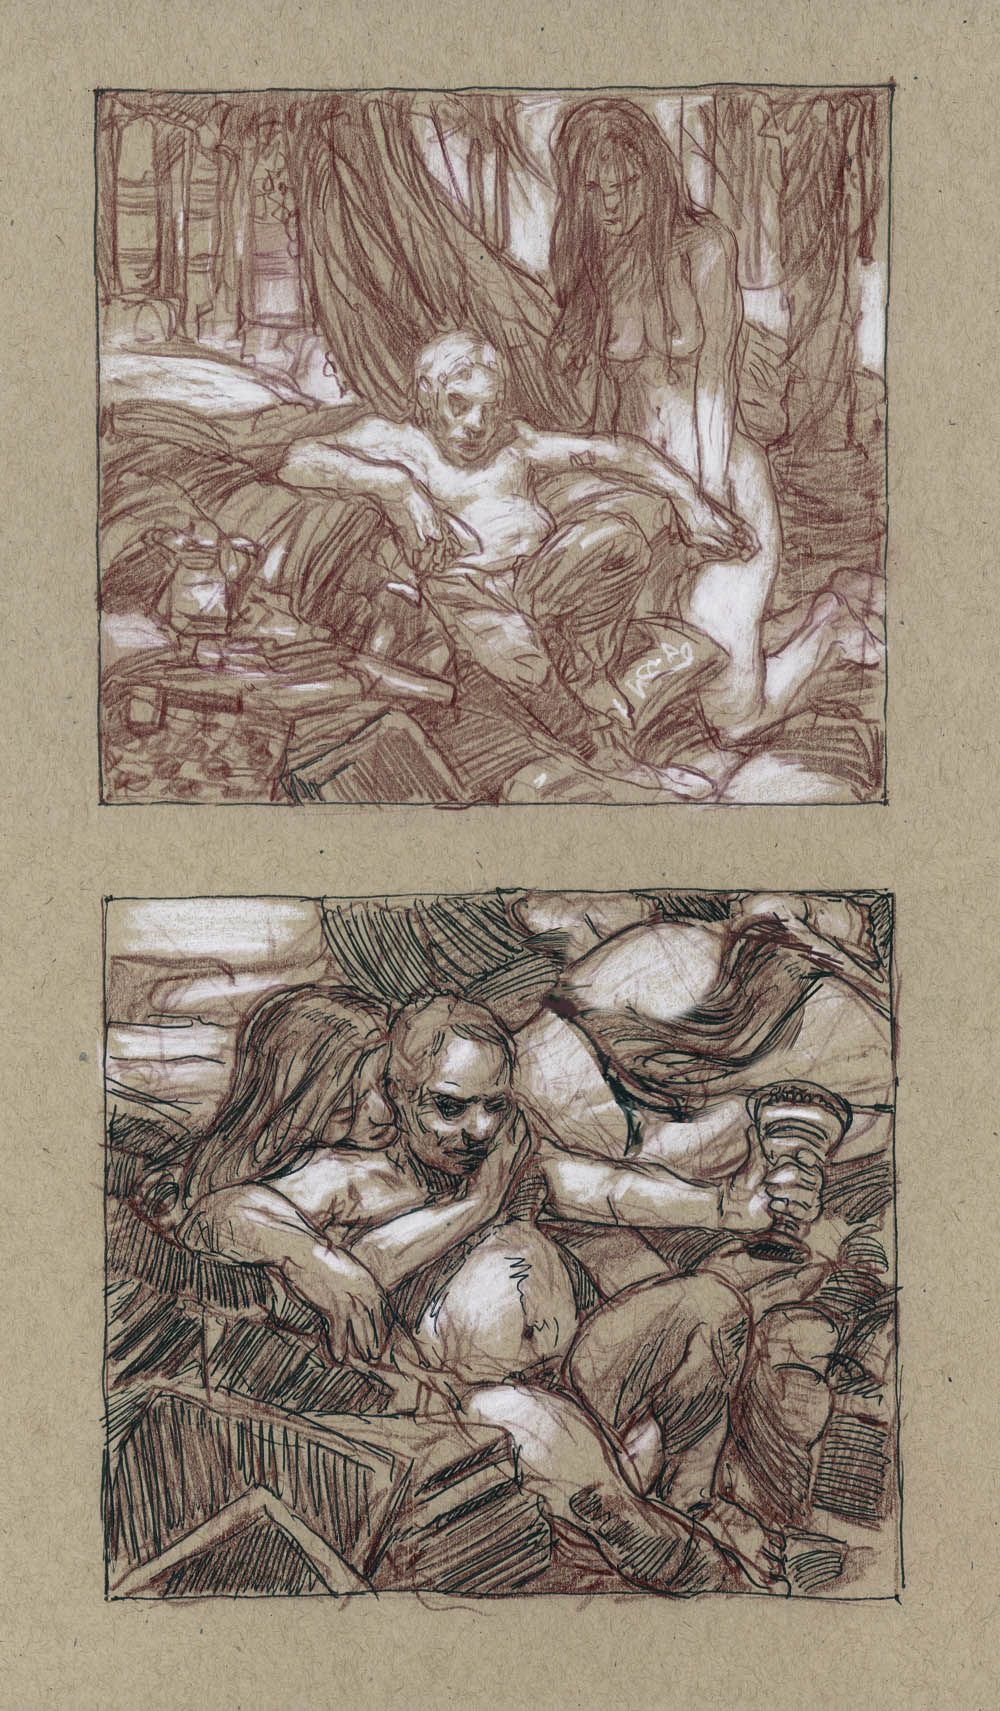 The Hand - rough concepts
14" x 11"  Watercolor and chalk on toned paper
private collection